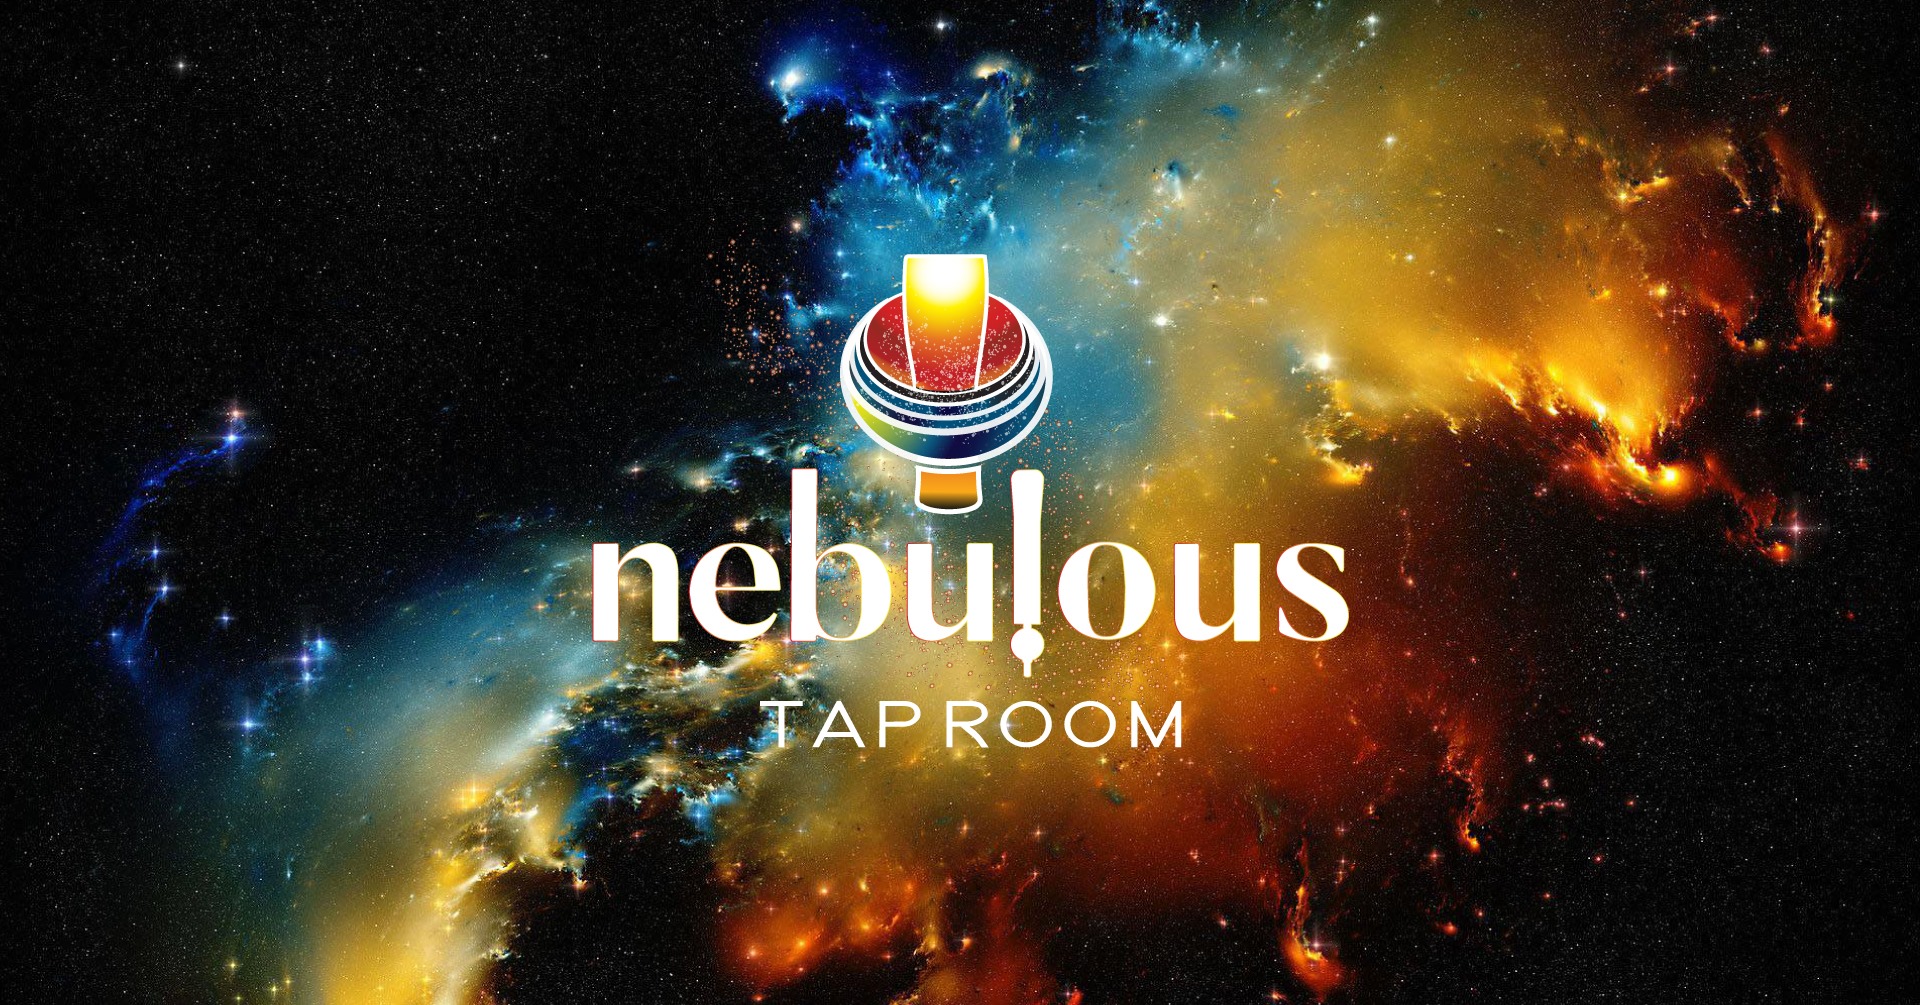 Nebulous Taproom (coming soon)